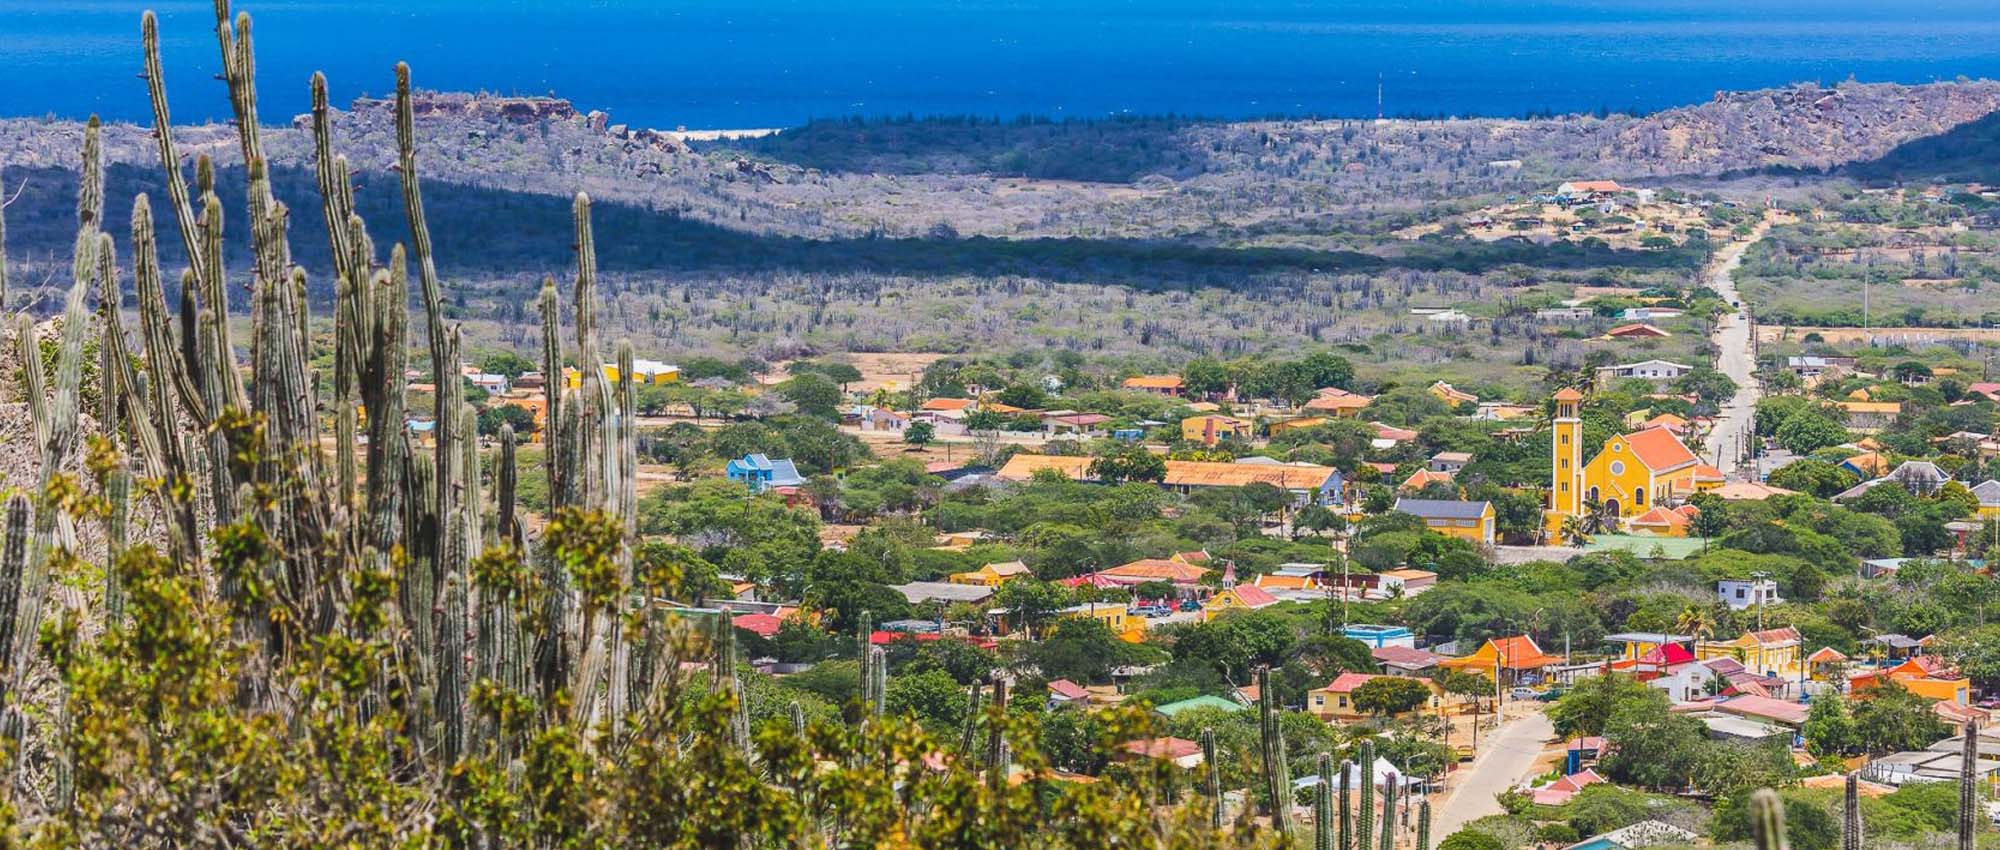 Aerial view of Rincon